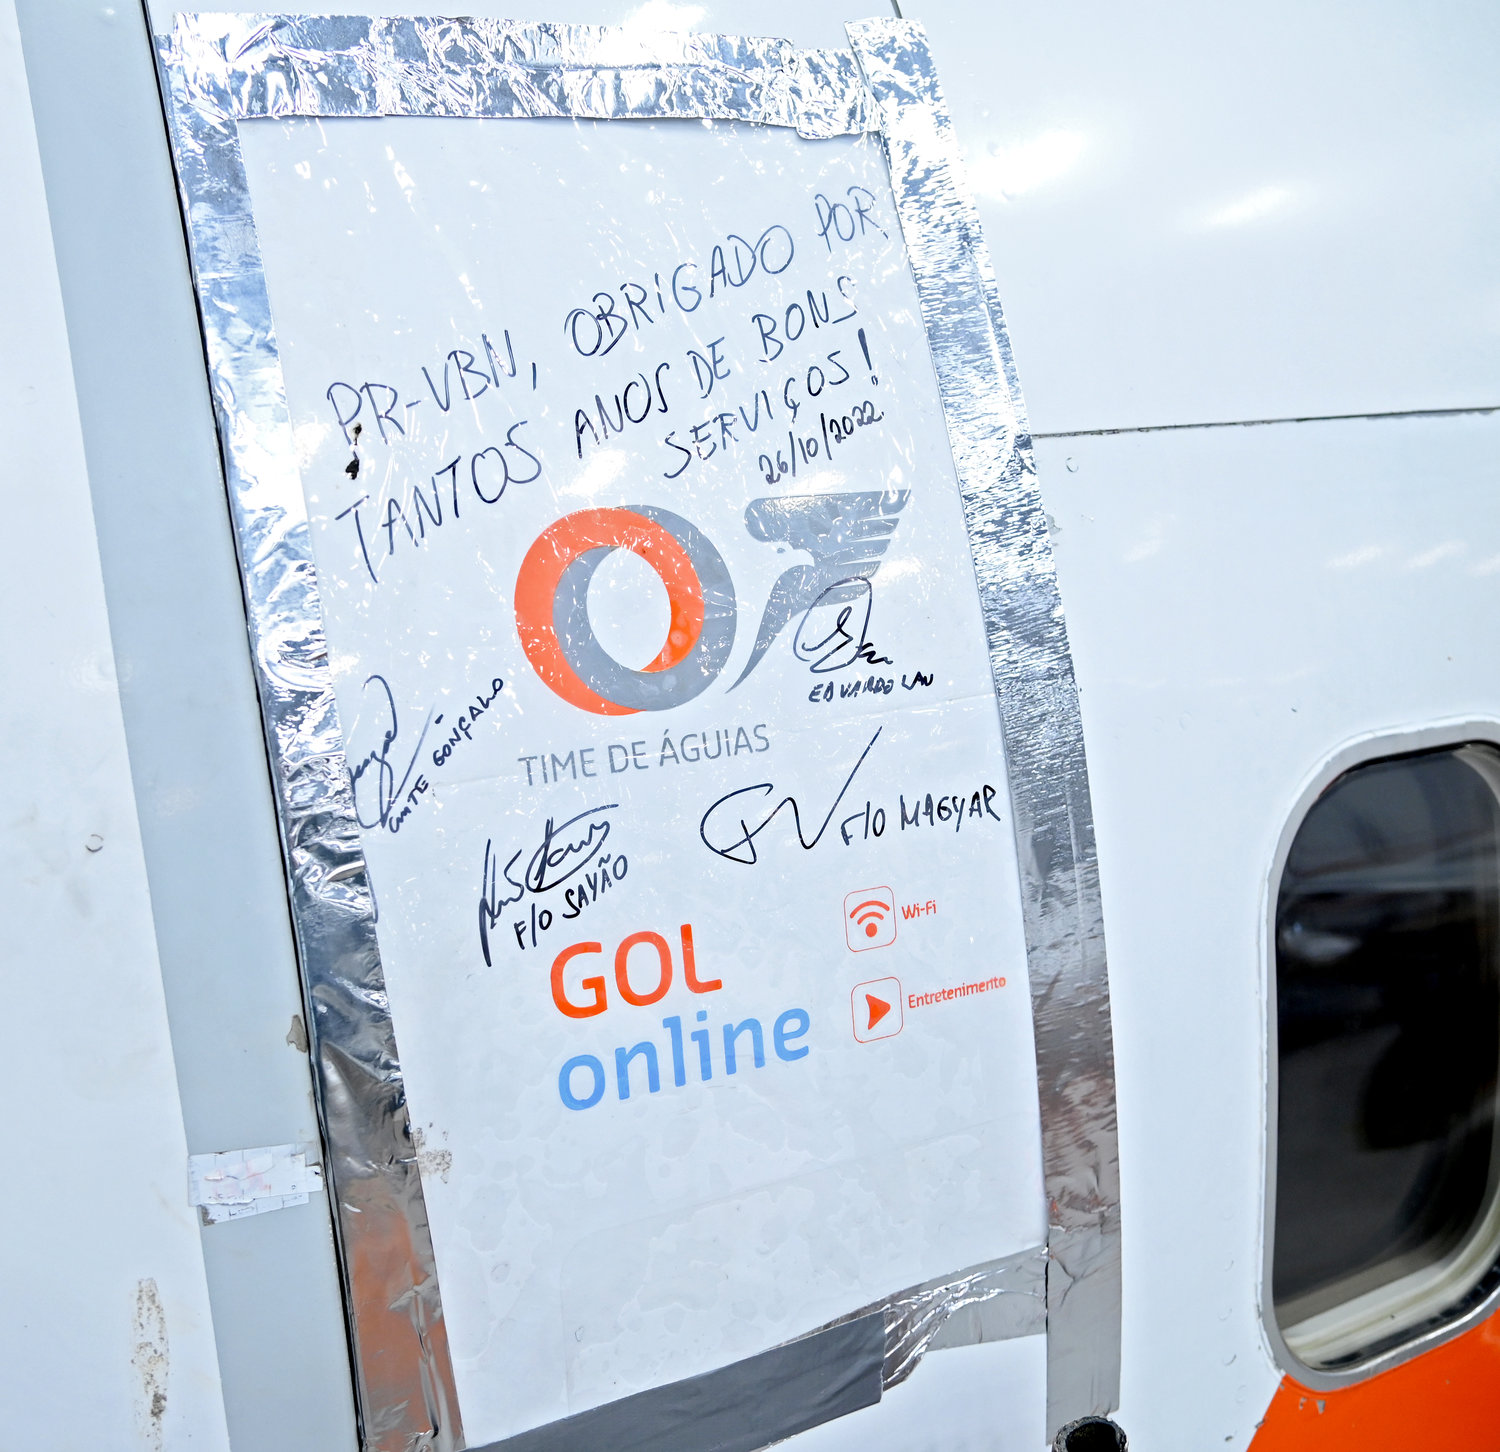 The pilots and crew that stepped off a Boeing 737 from Brazil wrote on the side of the plane their thanks for the reliable service throughout the years and then each one of the four signed it.